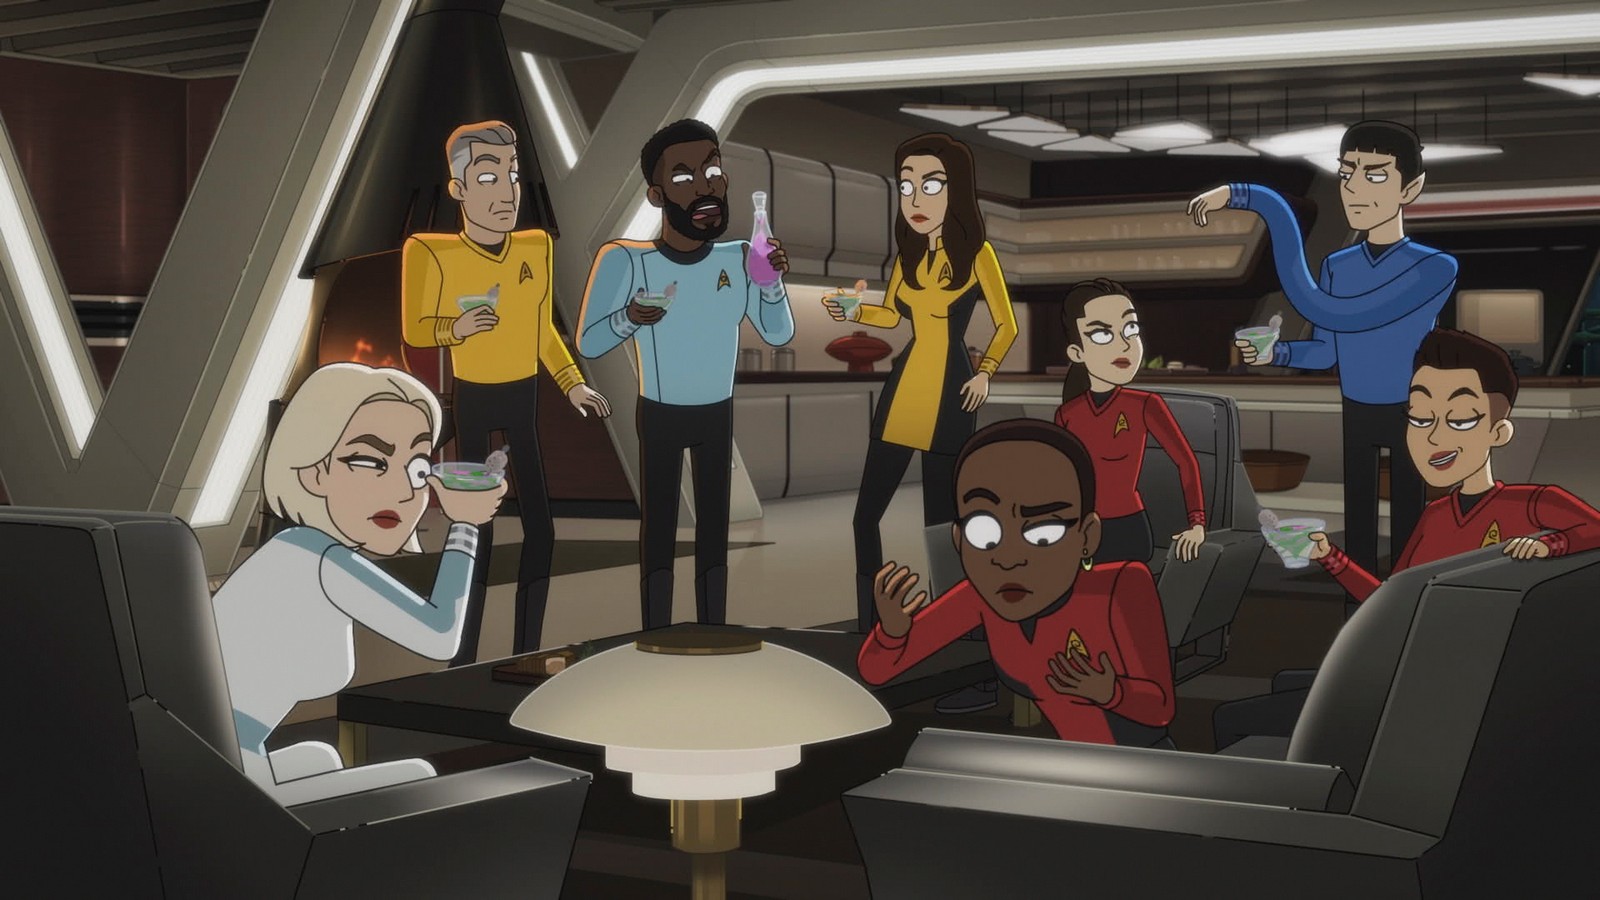 Fall Guys Star Trek crossover lets you dress as Spock and Worf